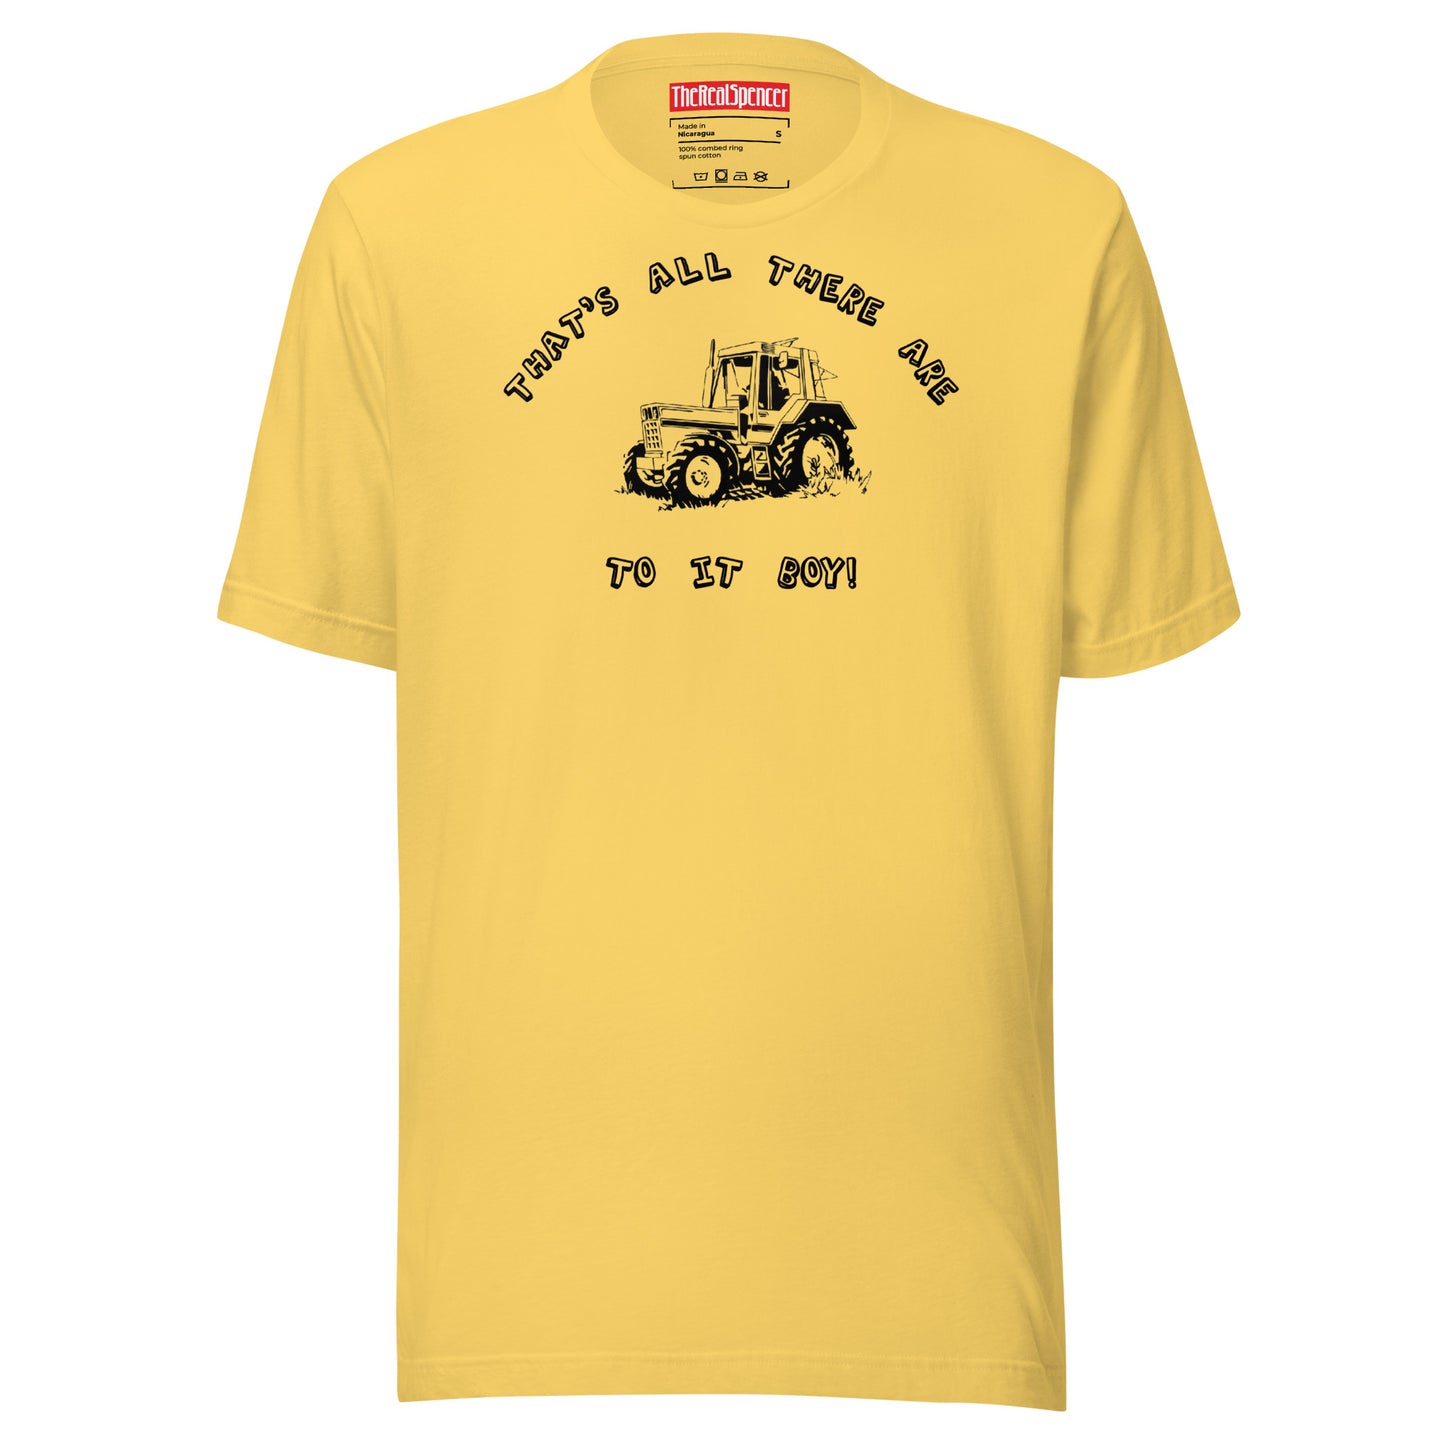 That's All There Are To It boy T-Shirt